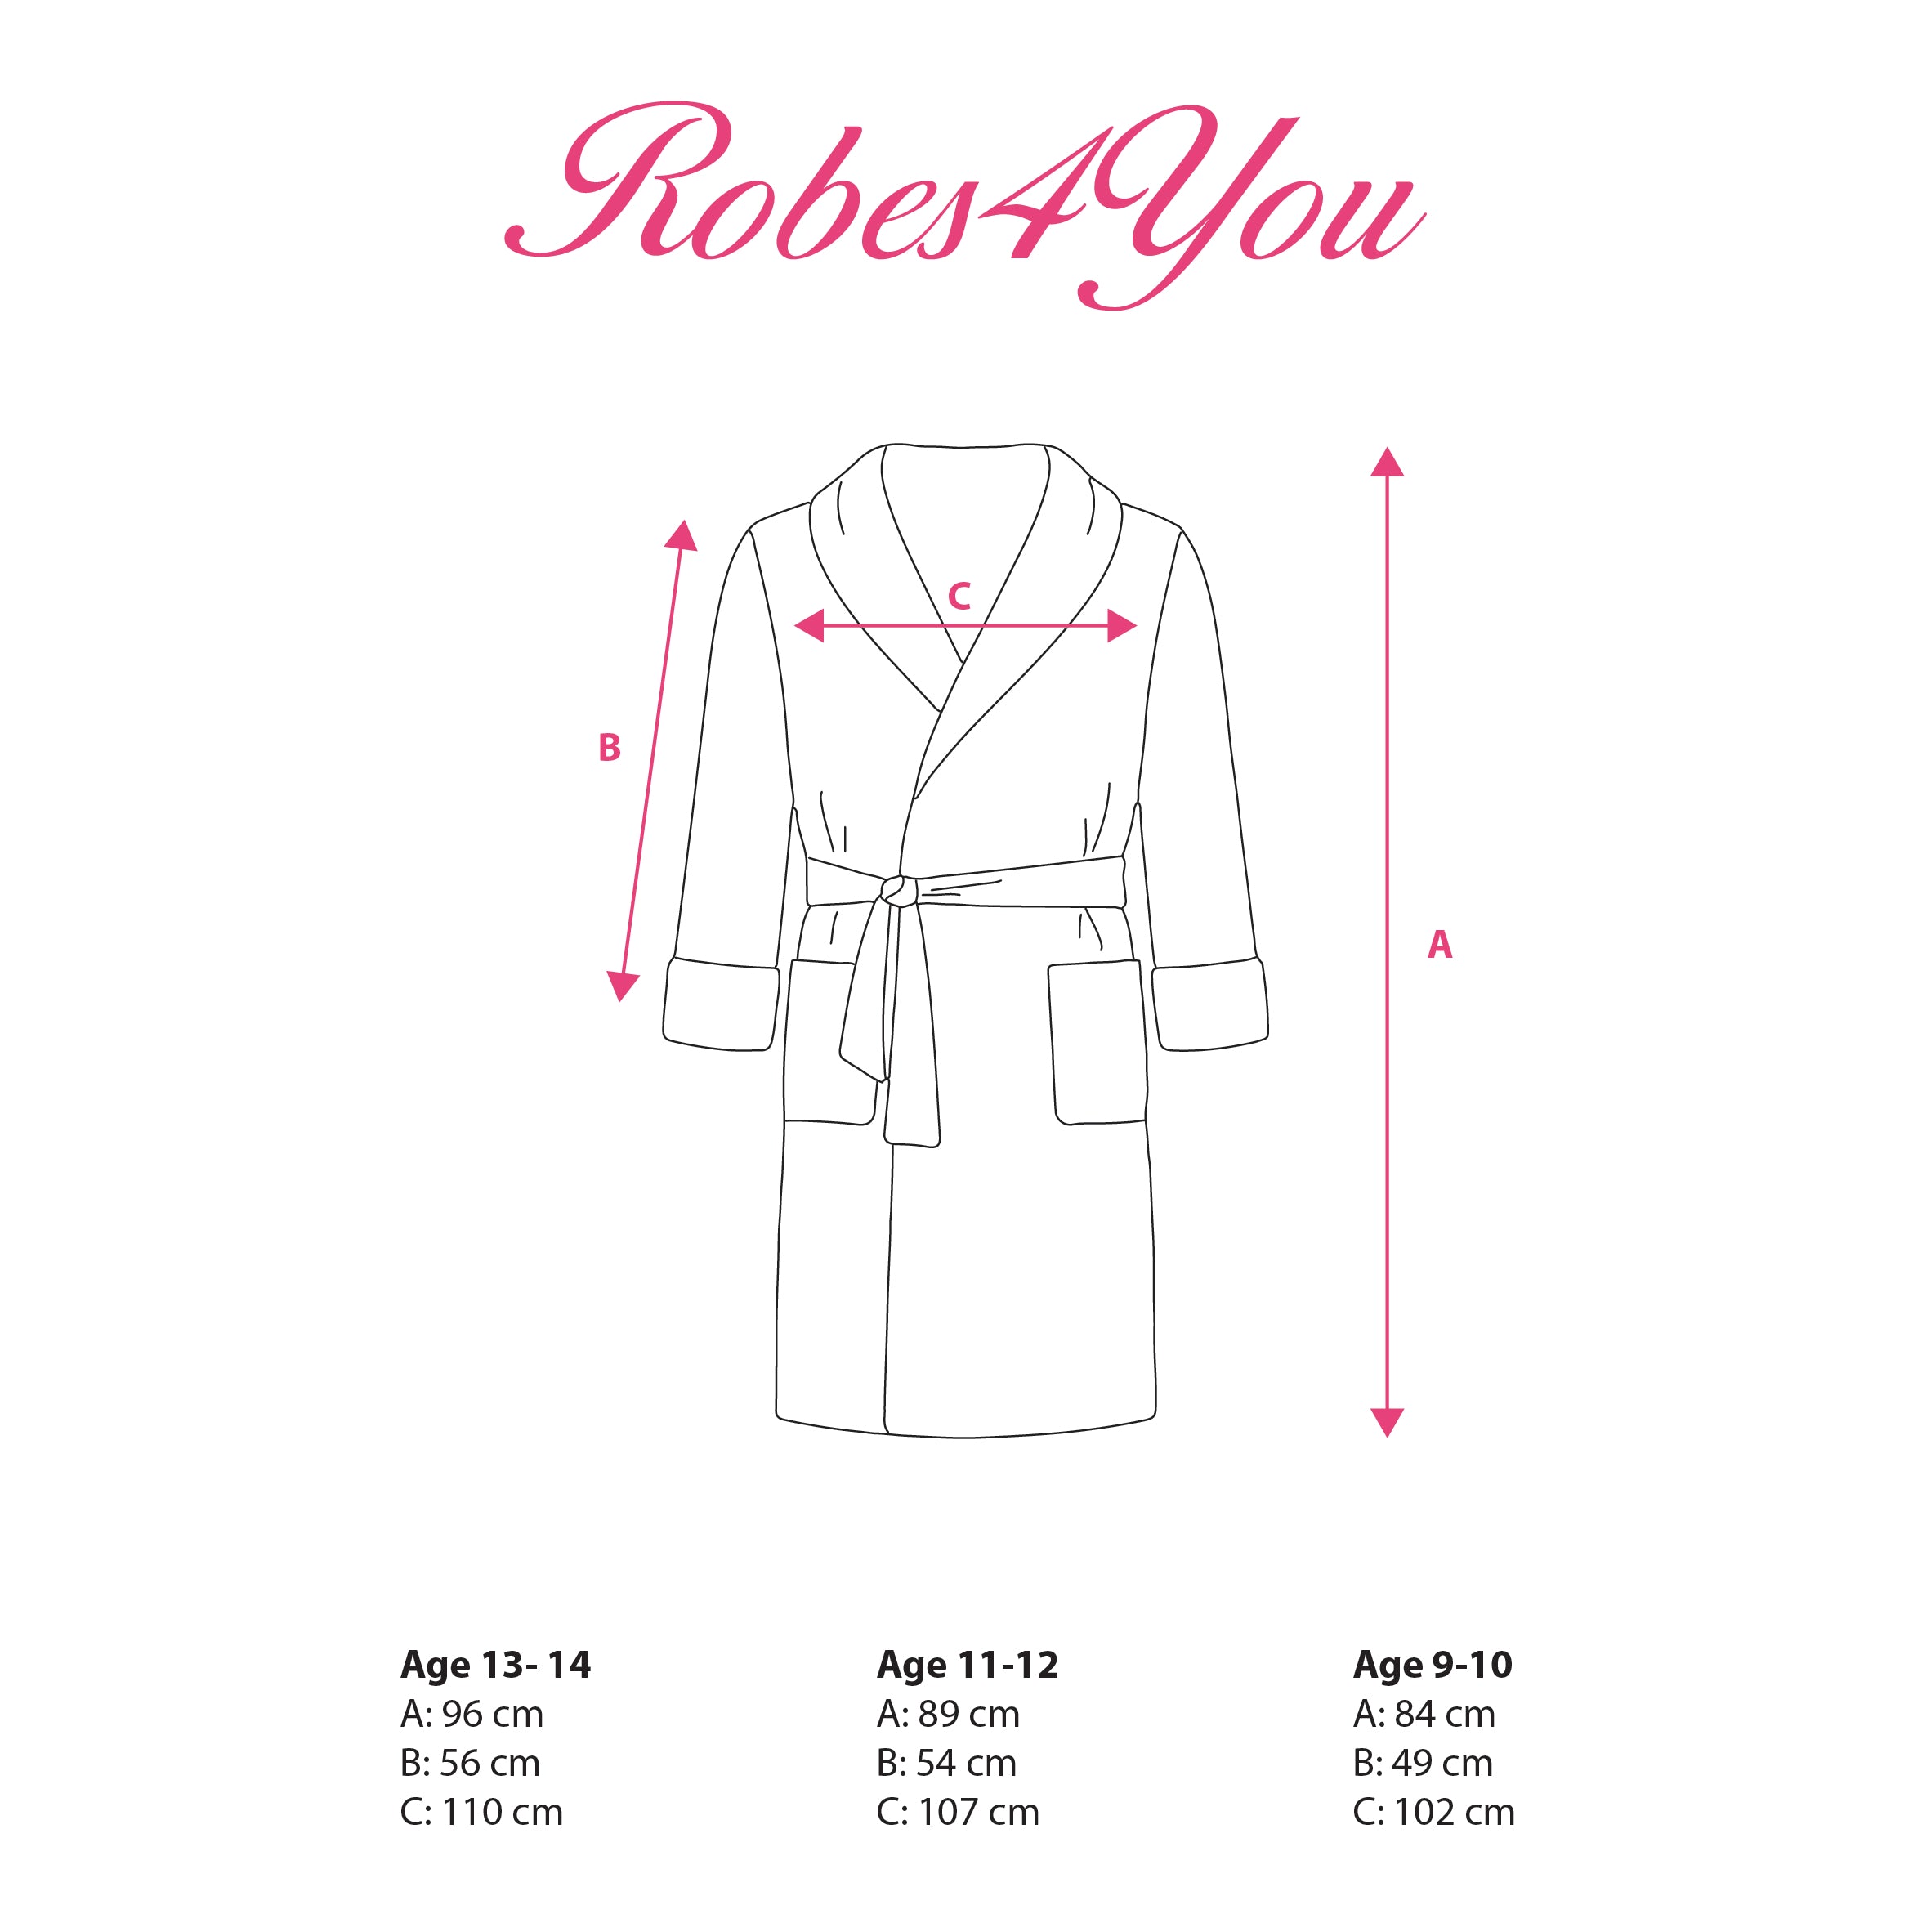 Teenager robes size-robes4you